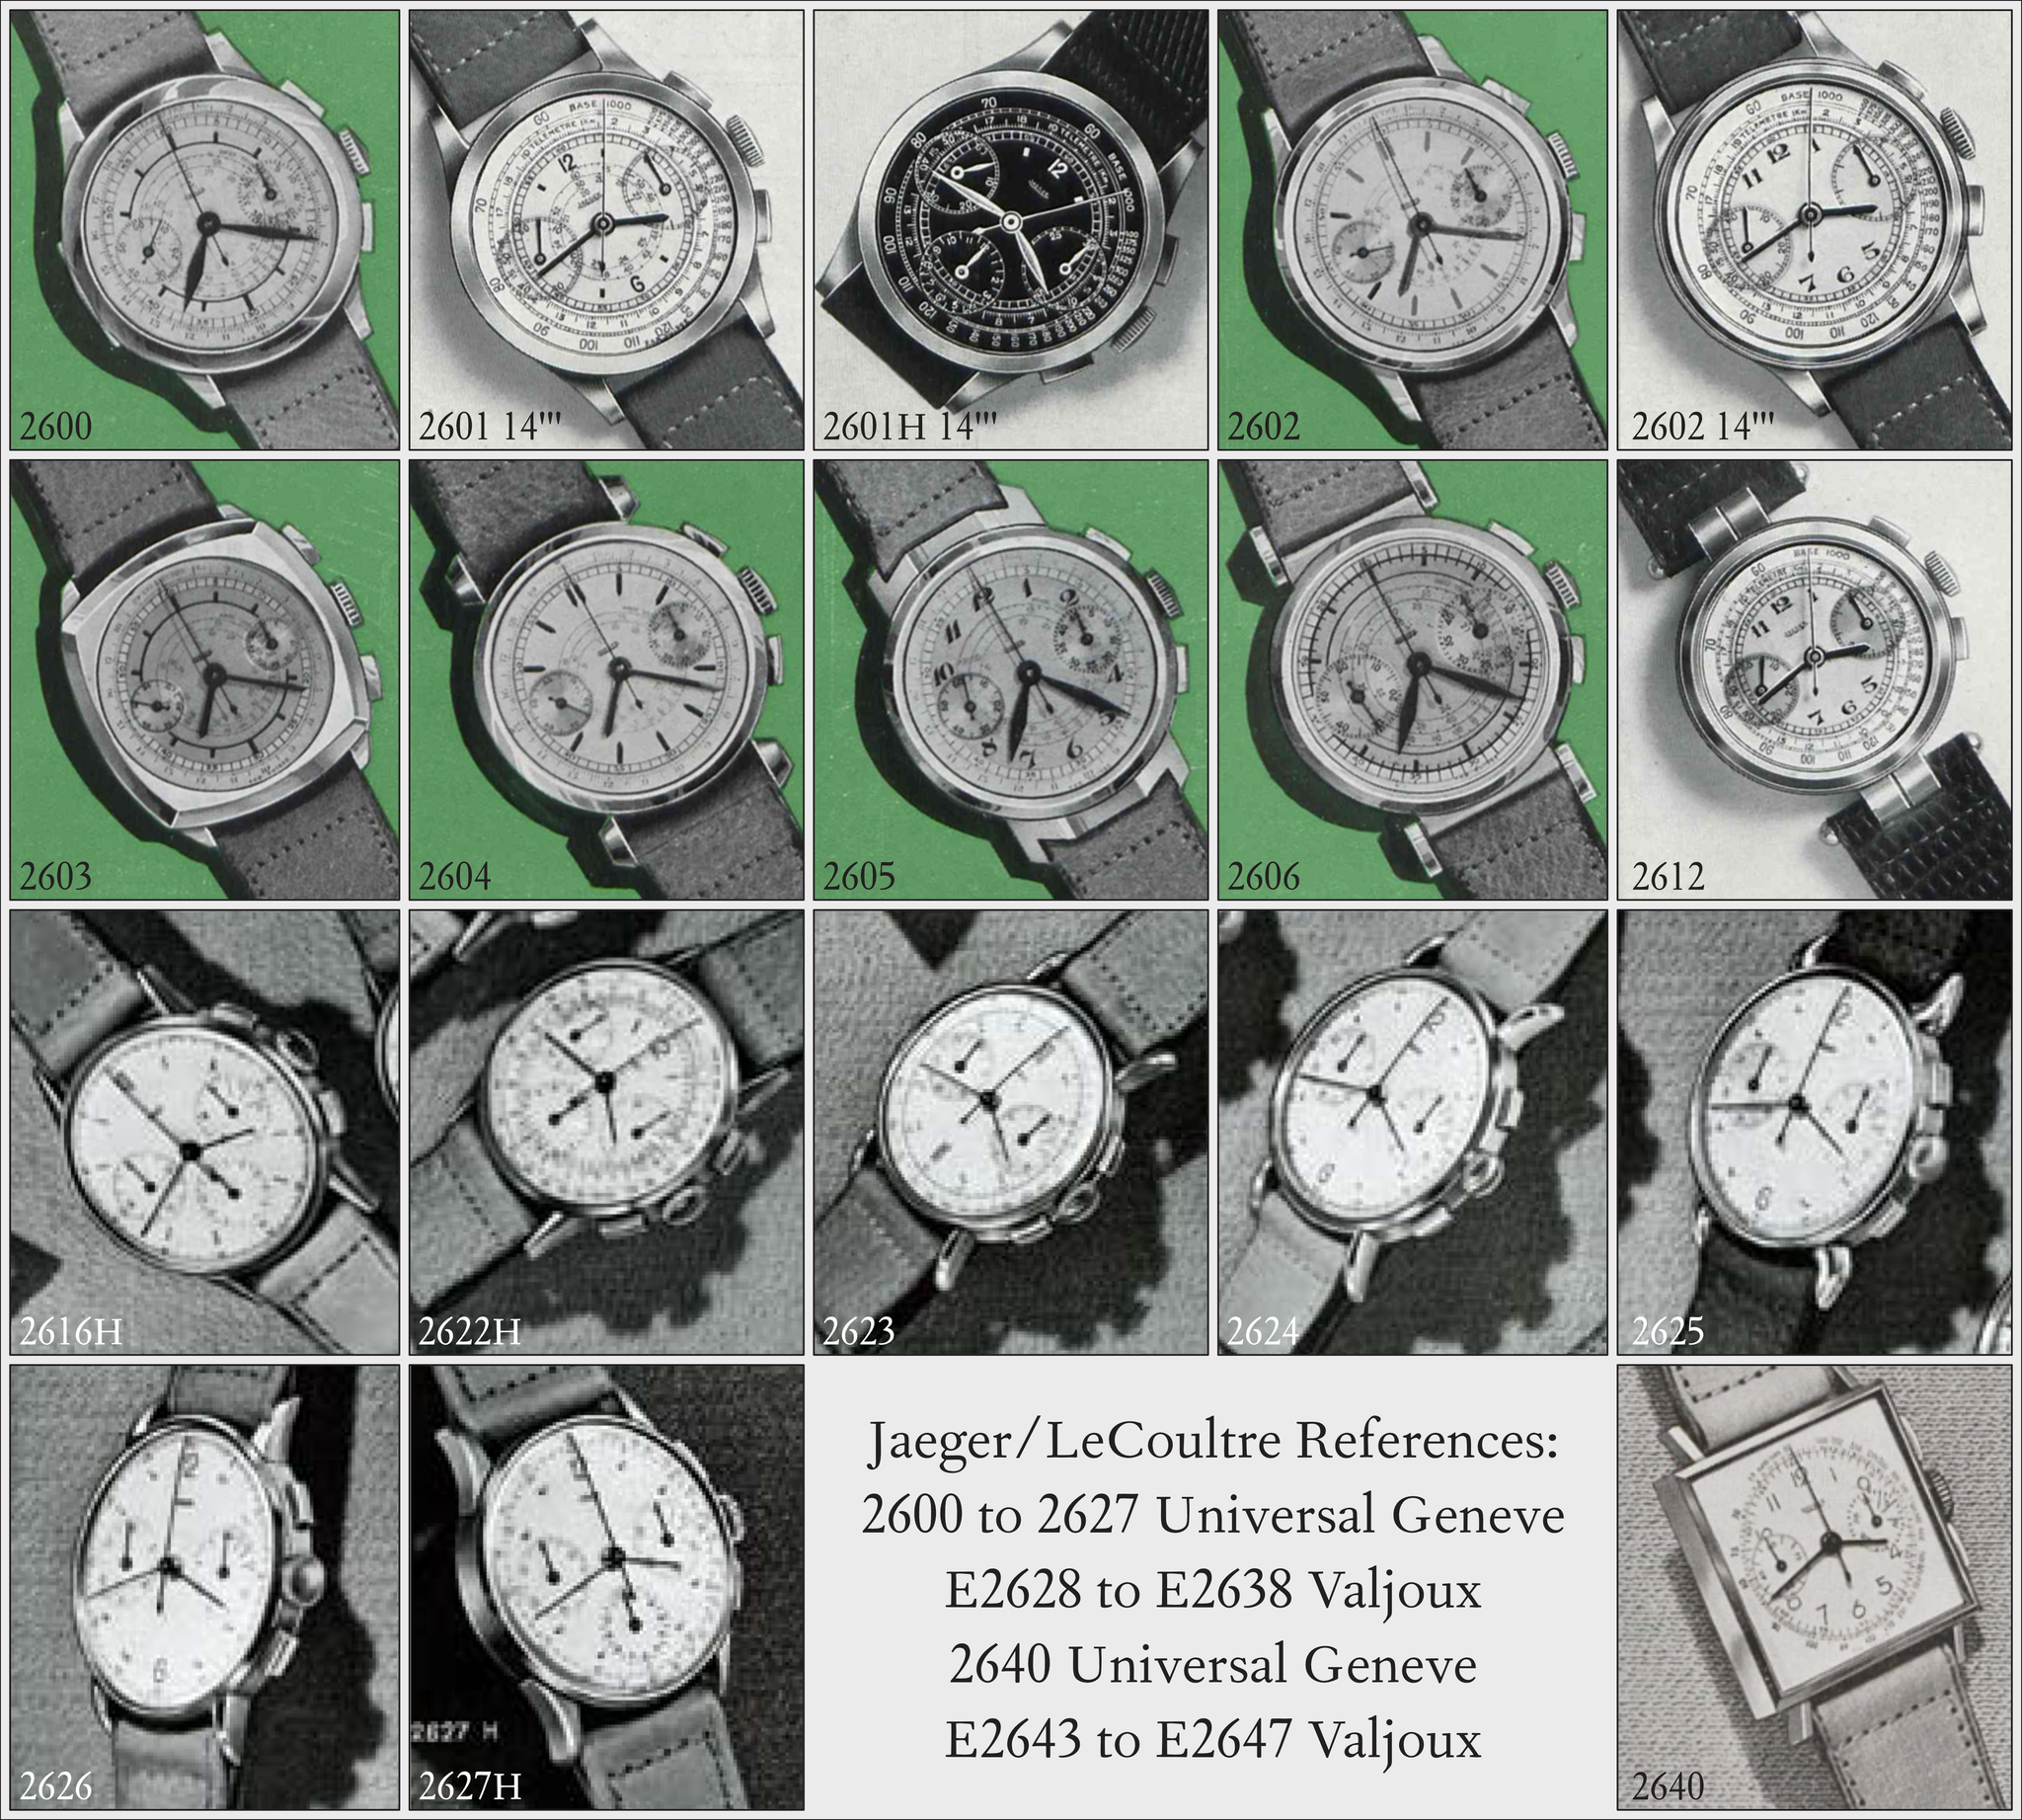 Jaeger LeCoultre internal reference system for Universal Geneve based chronographs